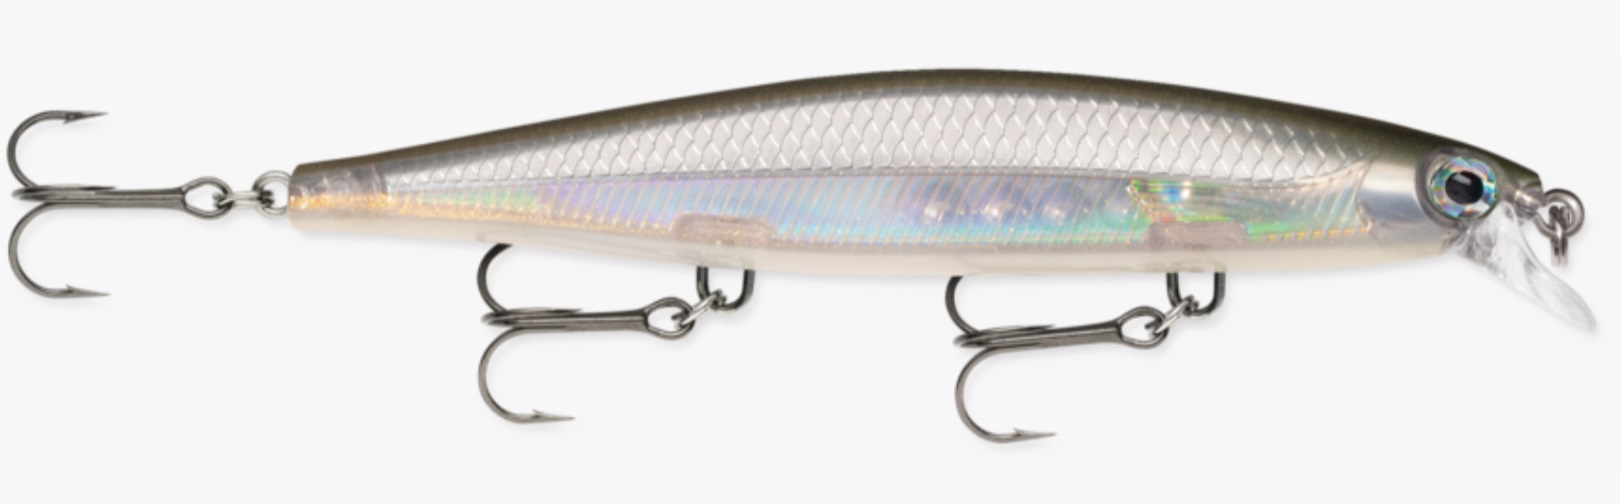 SPRO KGB Chad Shad 180 - Choice Of Colors